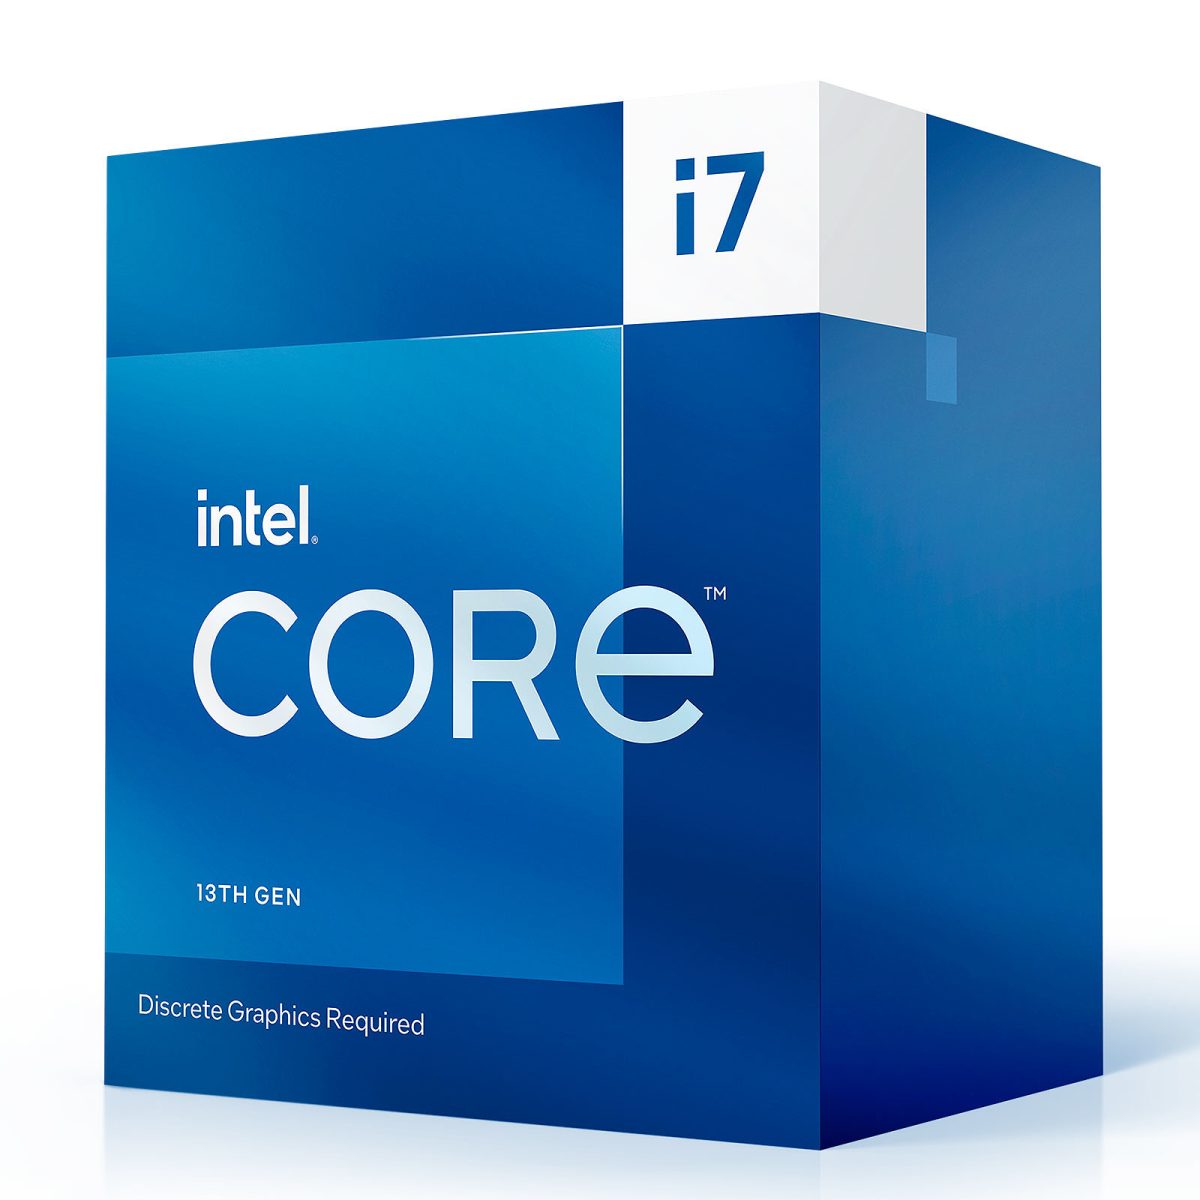 Intel -13Gen Core i7-13700 16-Cores up to 5.2 GHz - BX8071513700